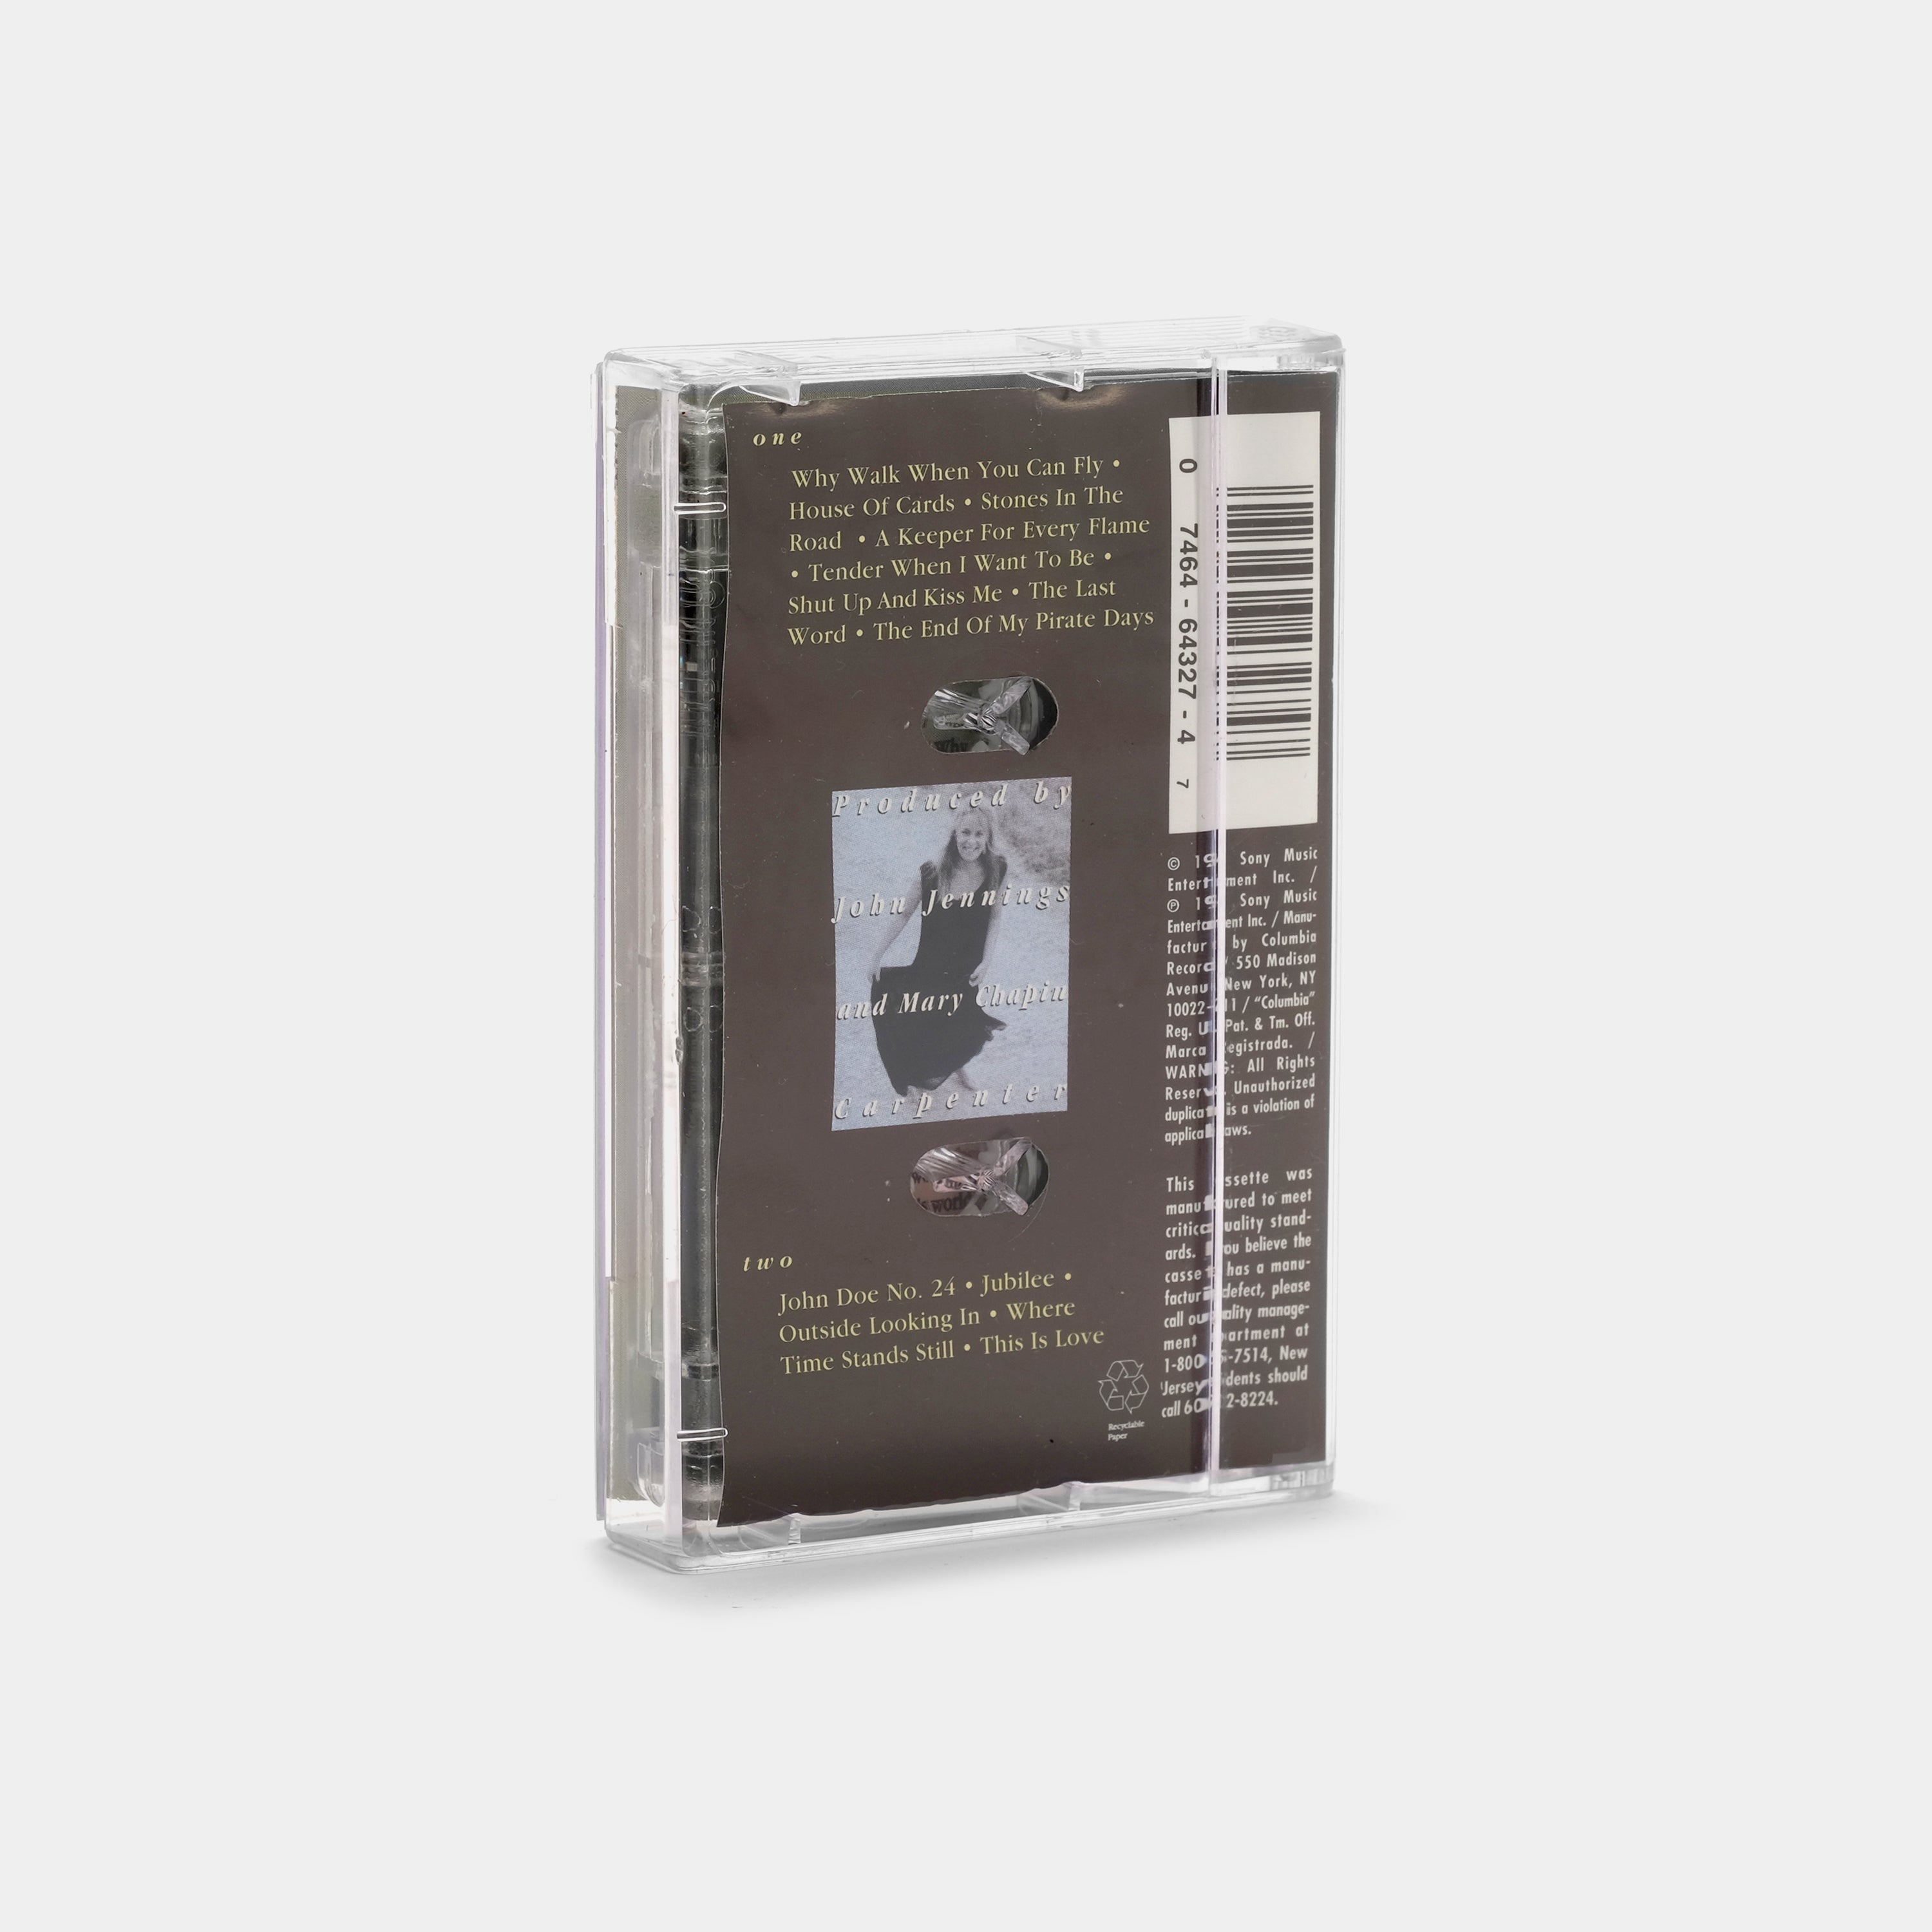 Mary Chapin Carpenter - Stones In The Road Cassette Tape